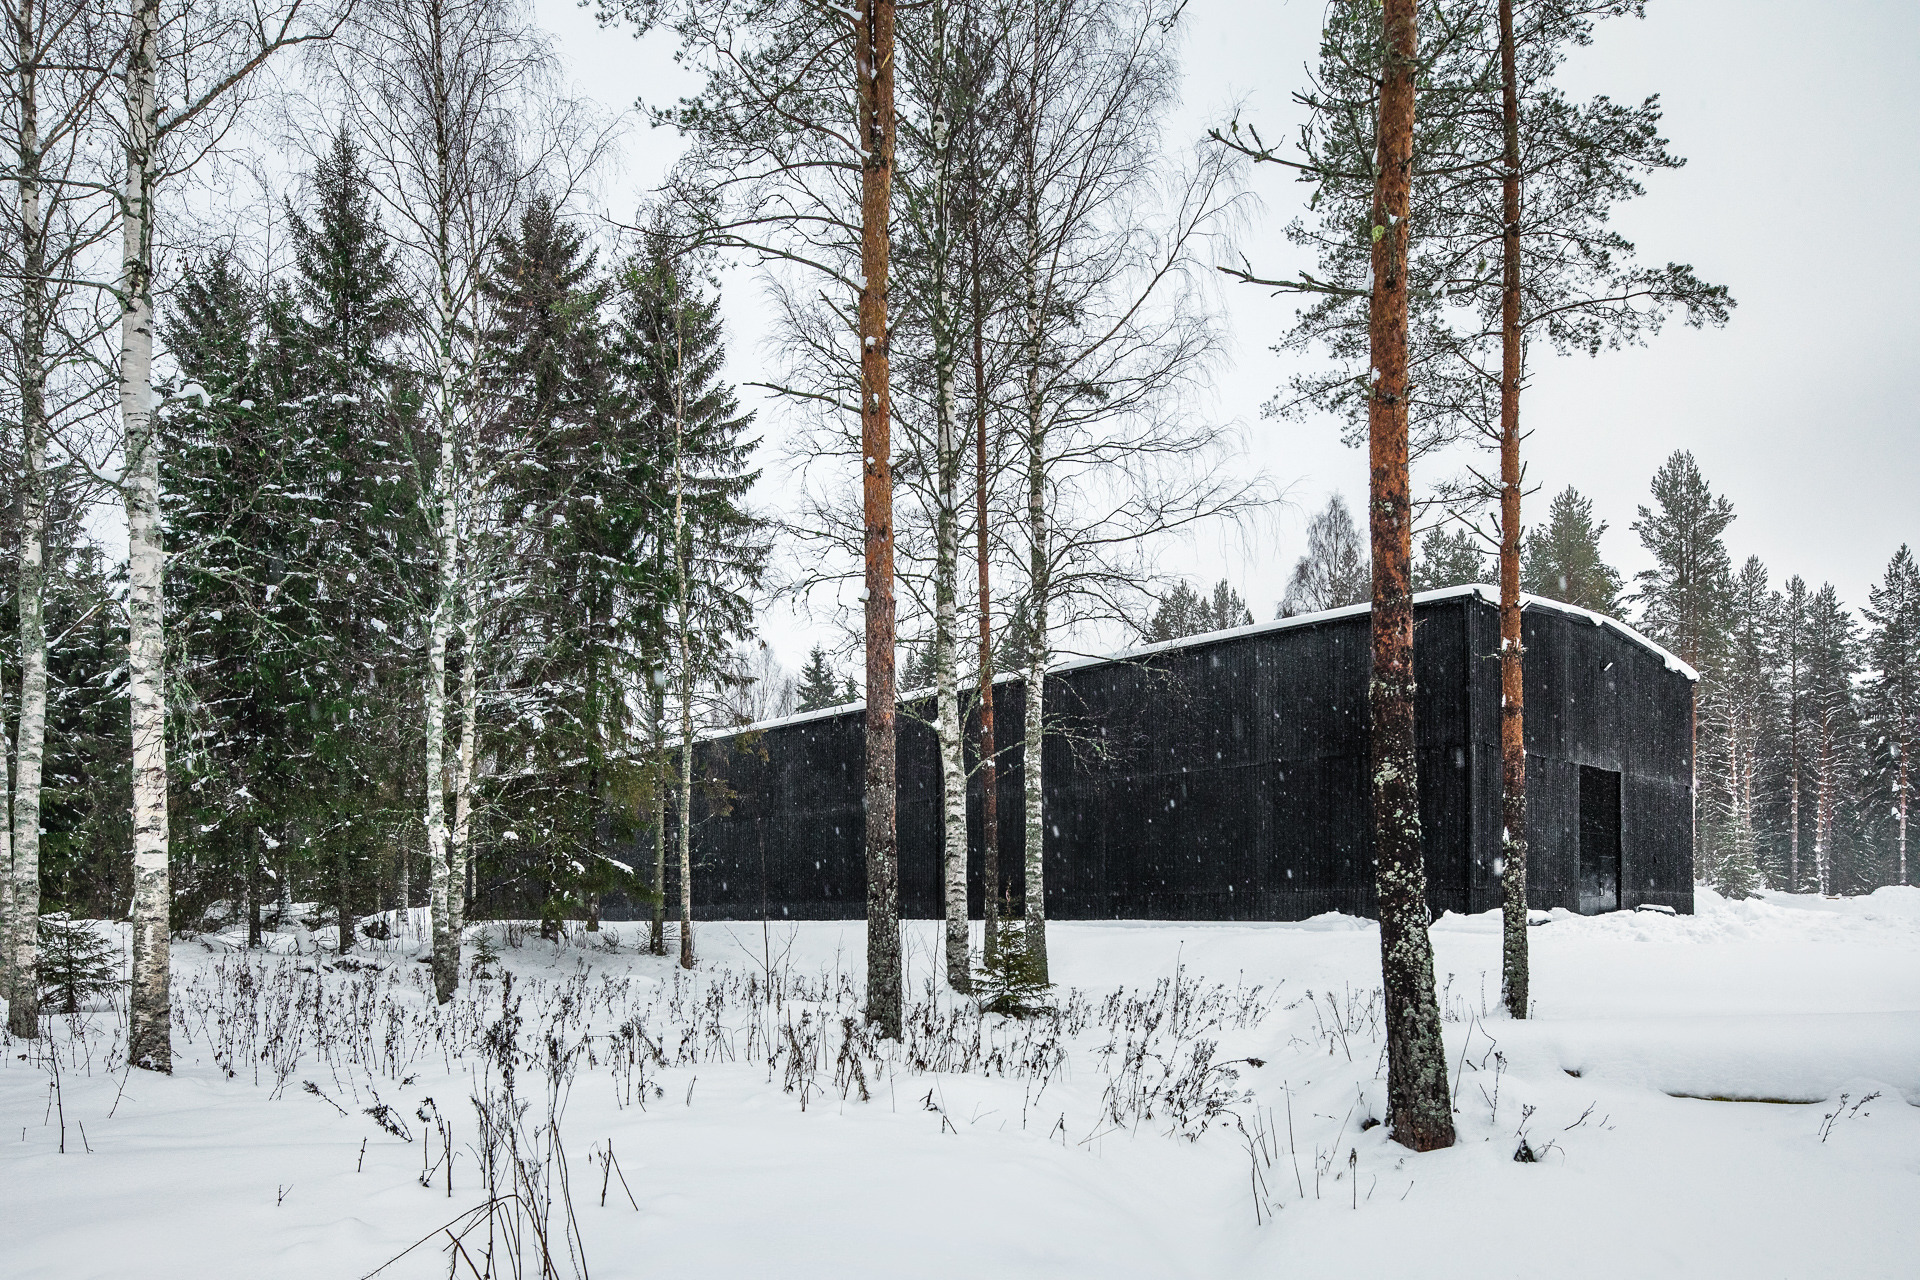 The 1056 square metre black warehouse of the Finnish Kyrö Distillery is located in the middle of the forest and at first glance appears to be boarded up with old, charred wooden planks. The façade of the barrel warehouse is inspired by the typical regional wooden barns.